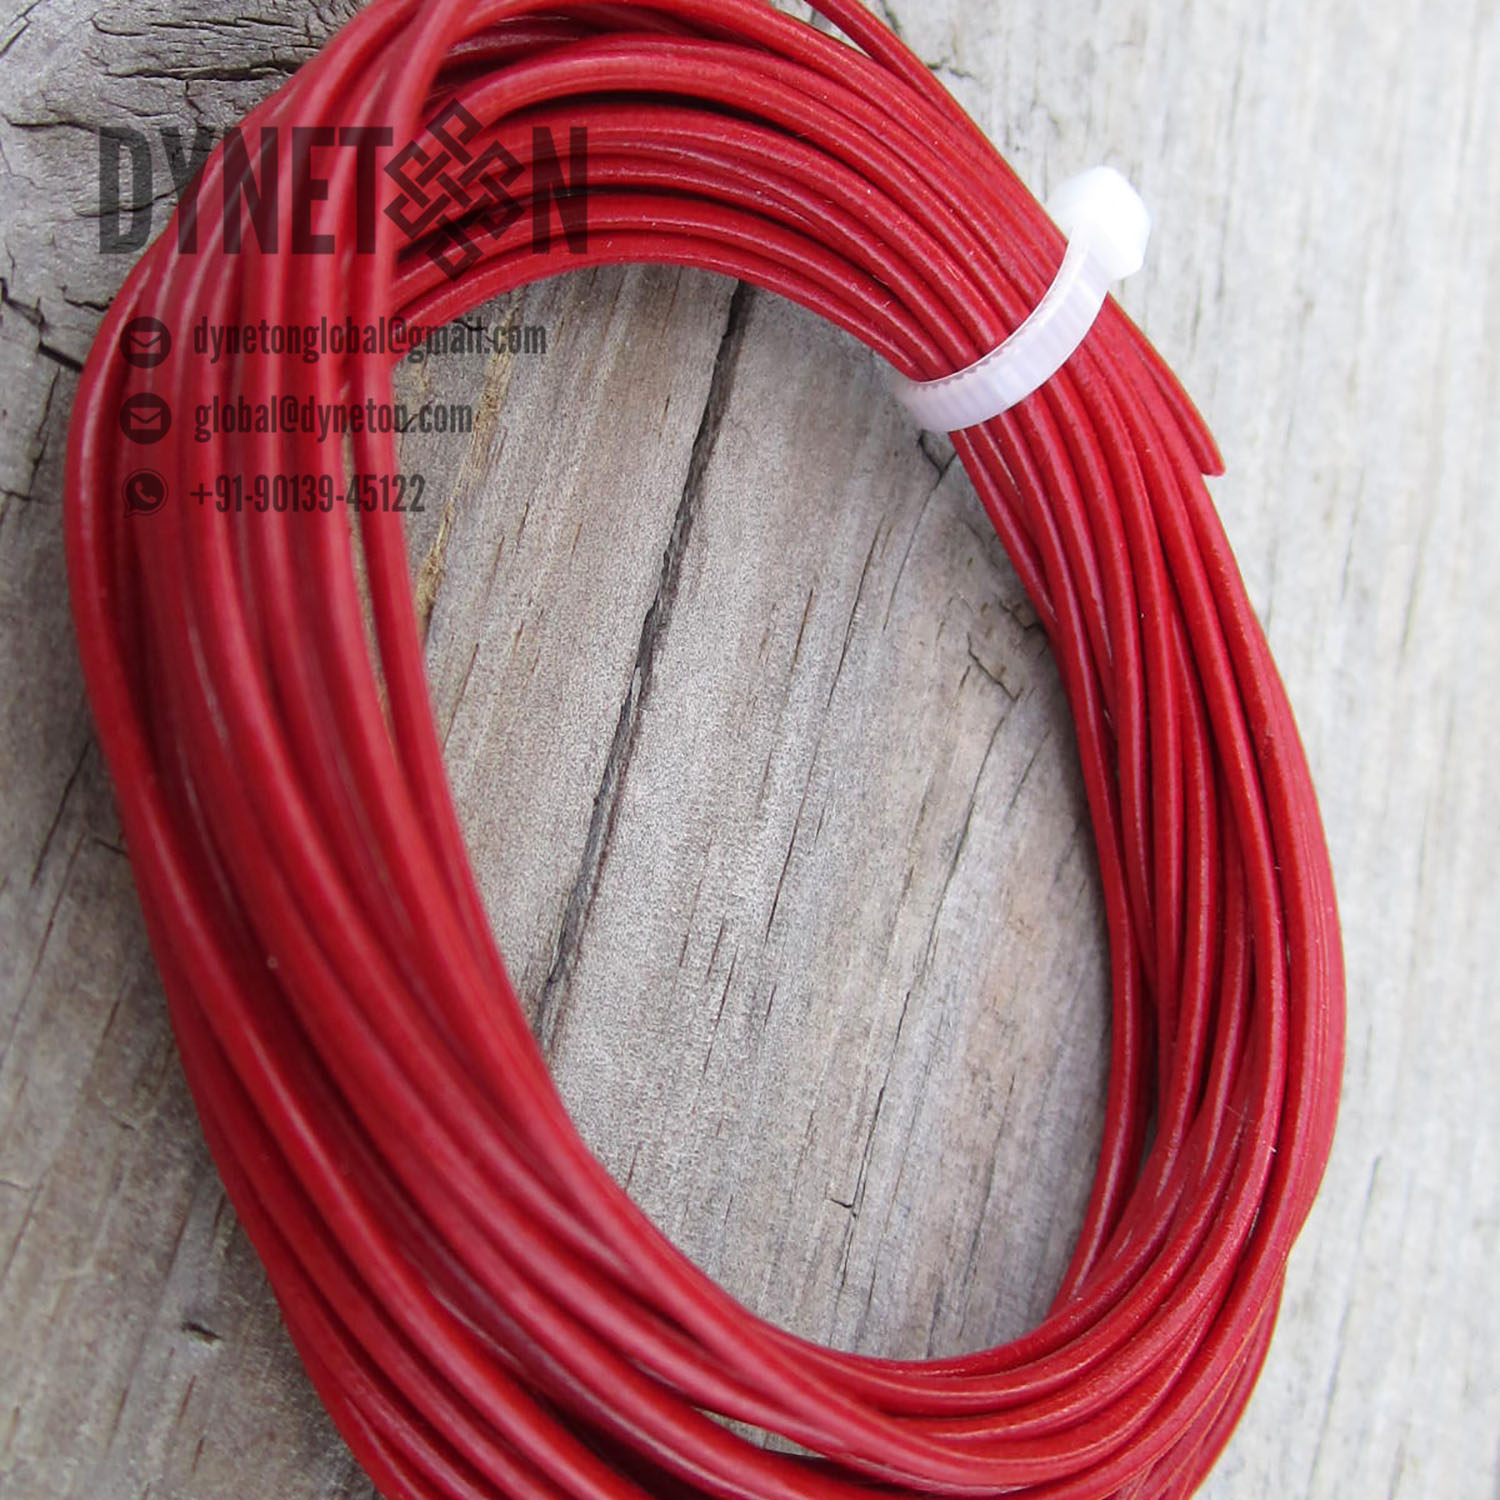 3mm Round Leather Cord - DYNETON / Round Leather Cords 3 mm